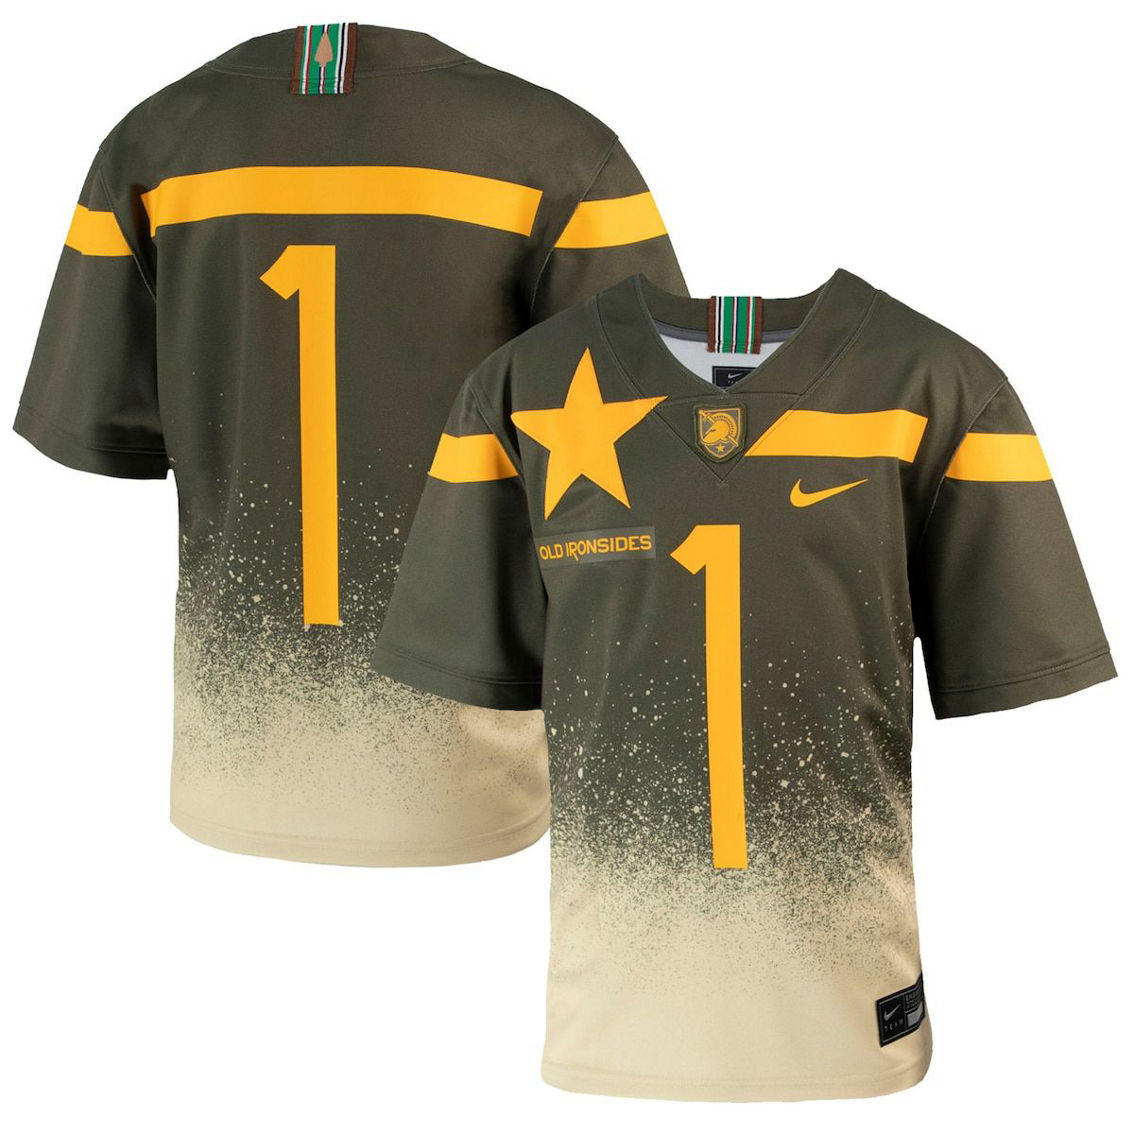 Nike Youth #19 Olive Army Black Knights 1st Armored Division Old Ironsides Untouchable Football Jersey - Image 2 of 4